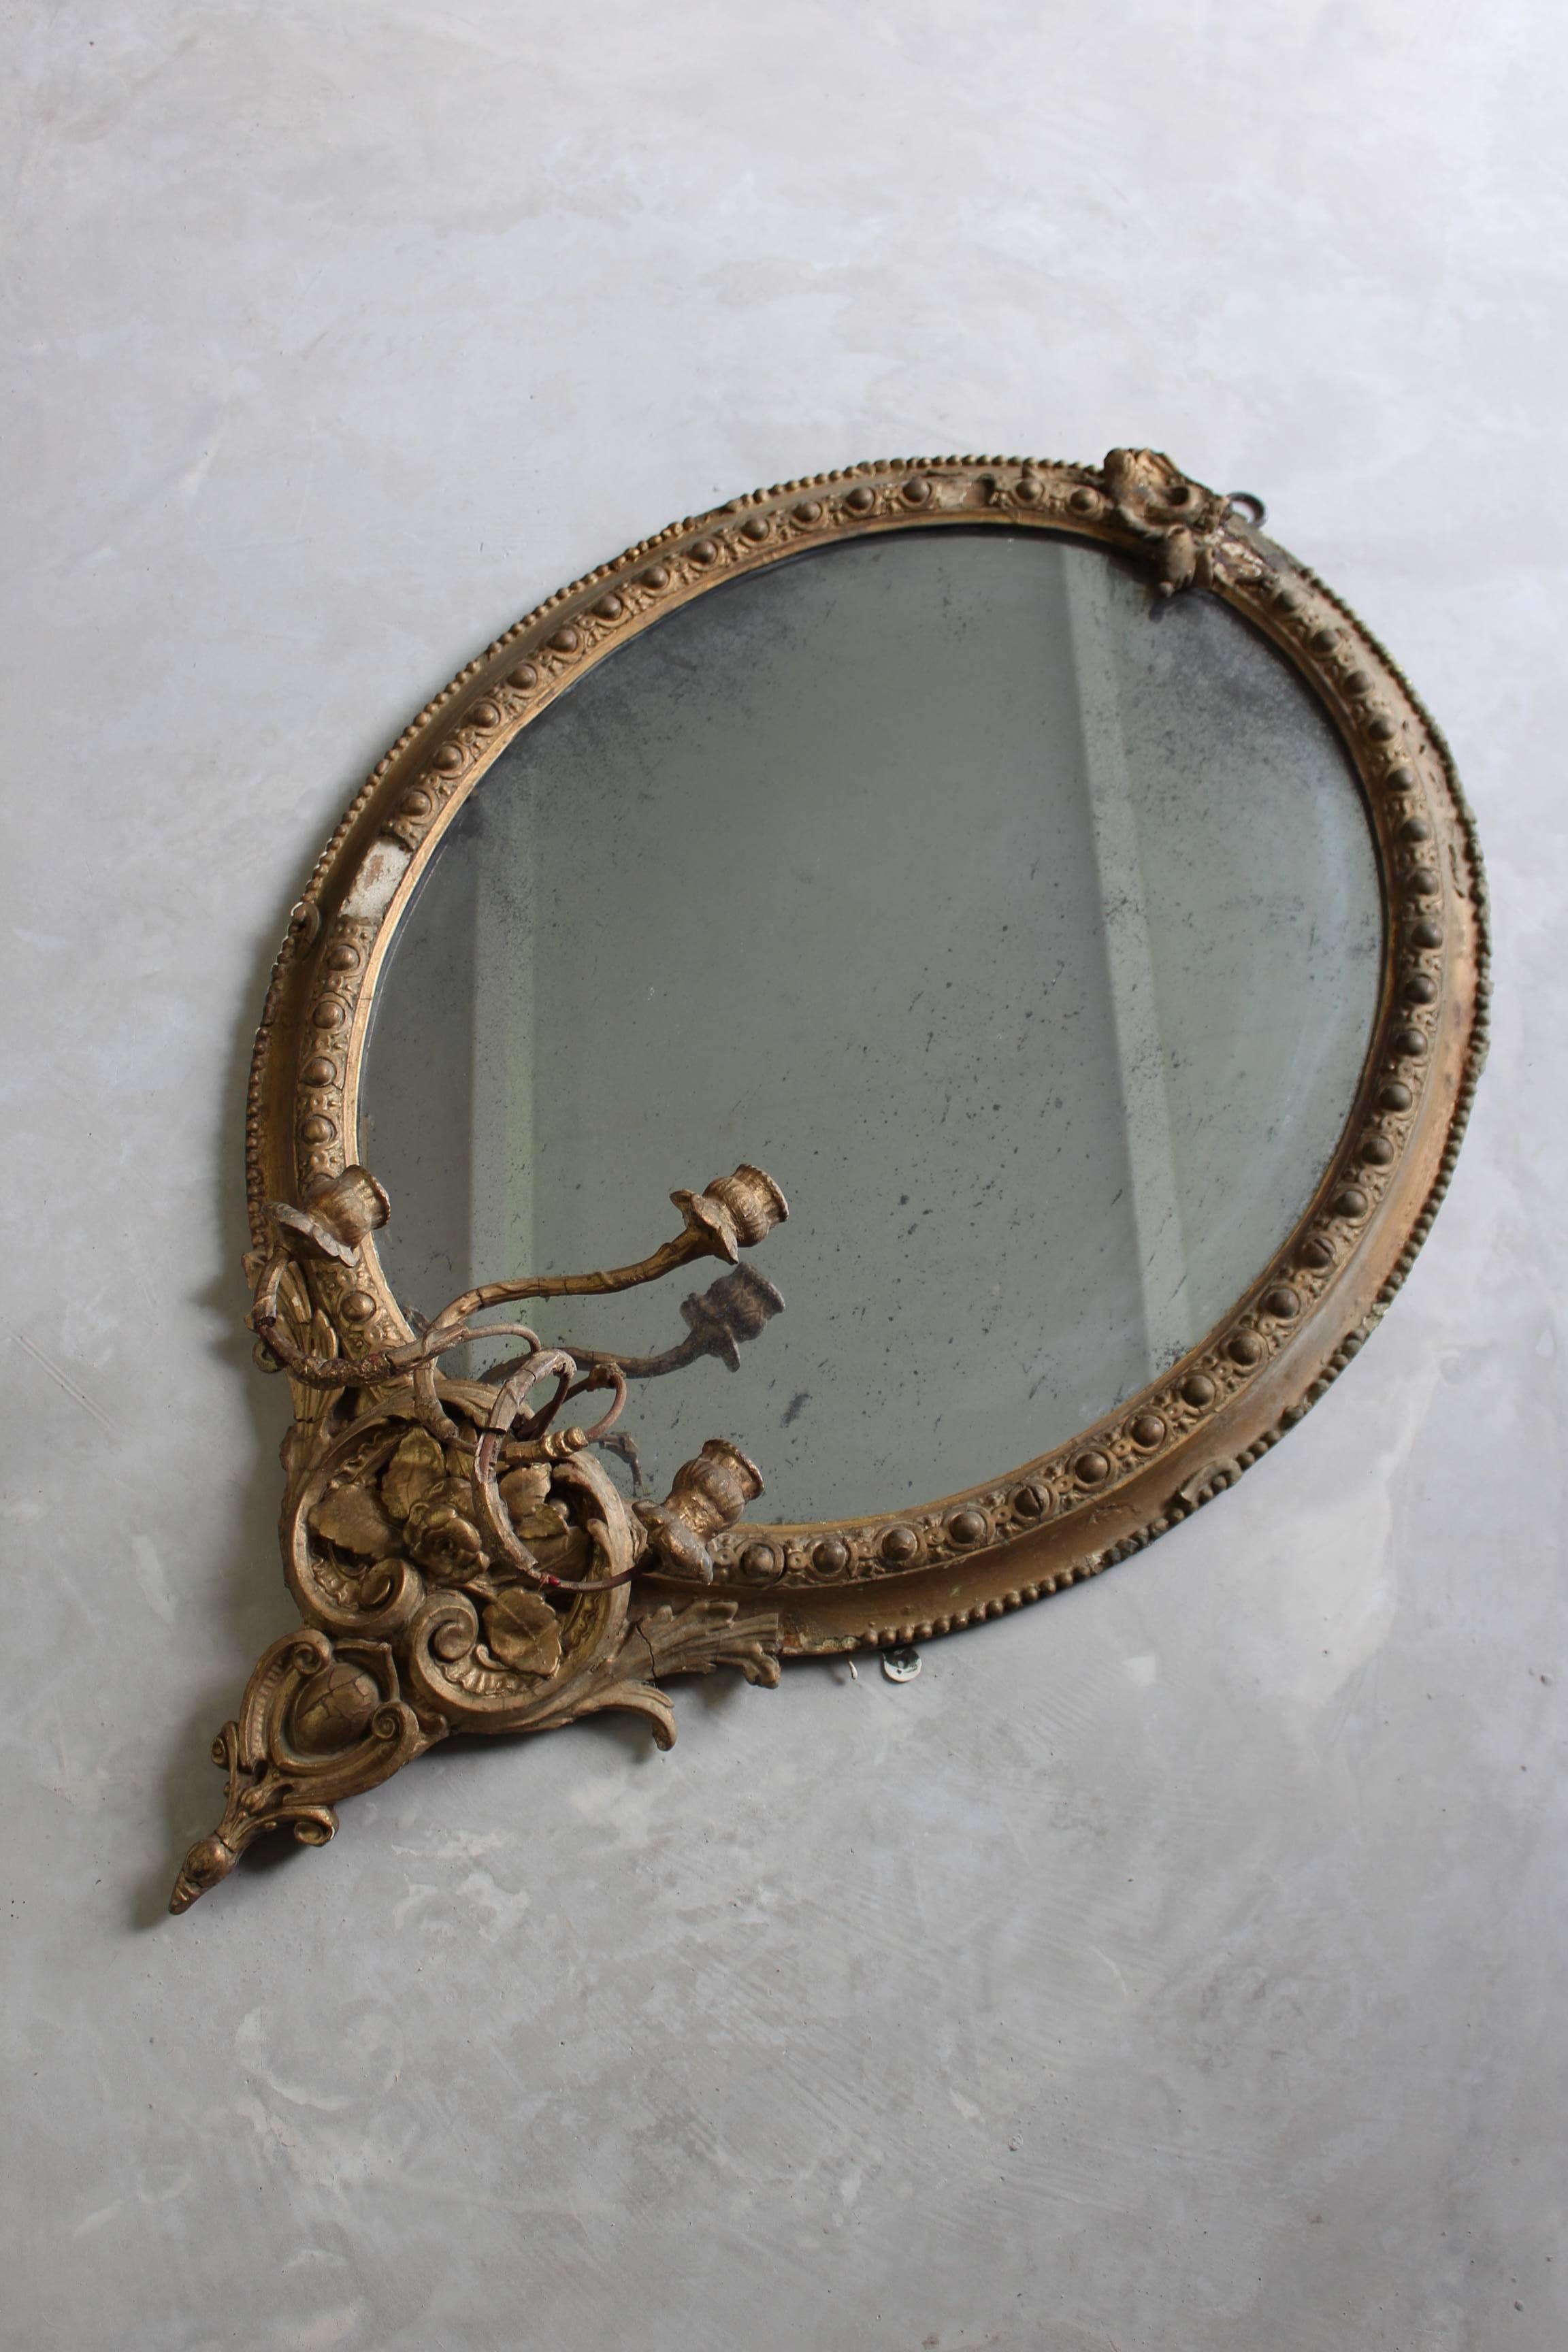 Antique gilt girandole mirror. Large early 19th century gilt gesso girandole oval mirror. The mirror is heavily foxed.

Please click our logo for more items, and to see our full inventory.